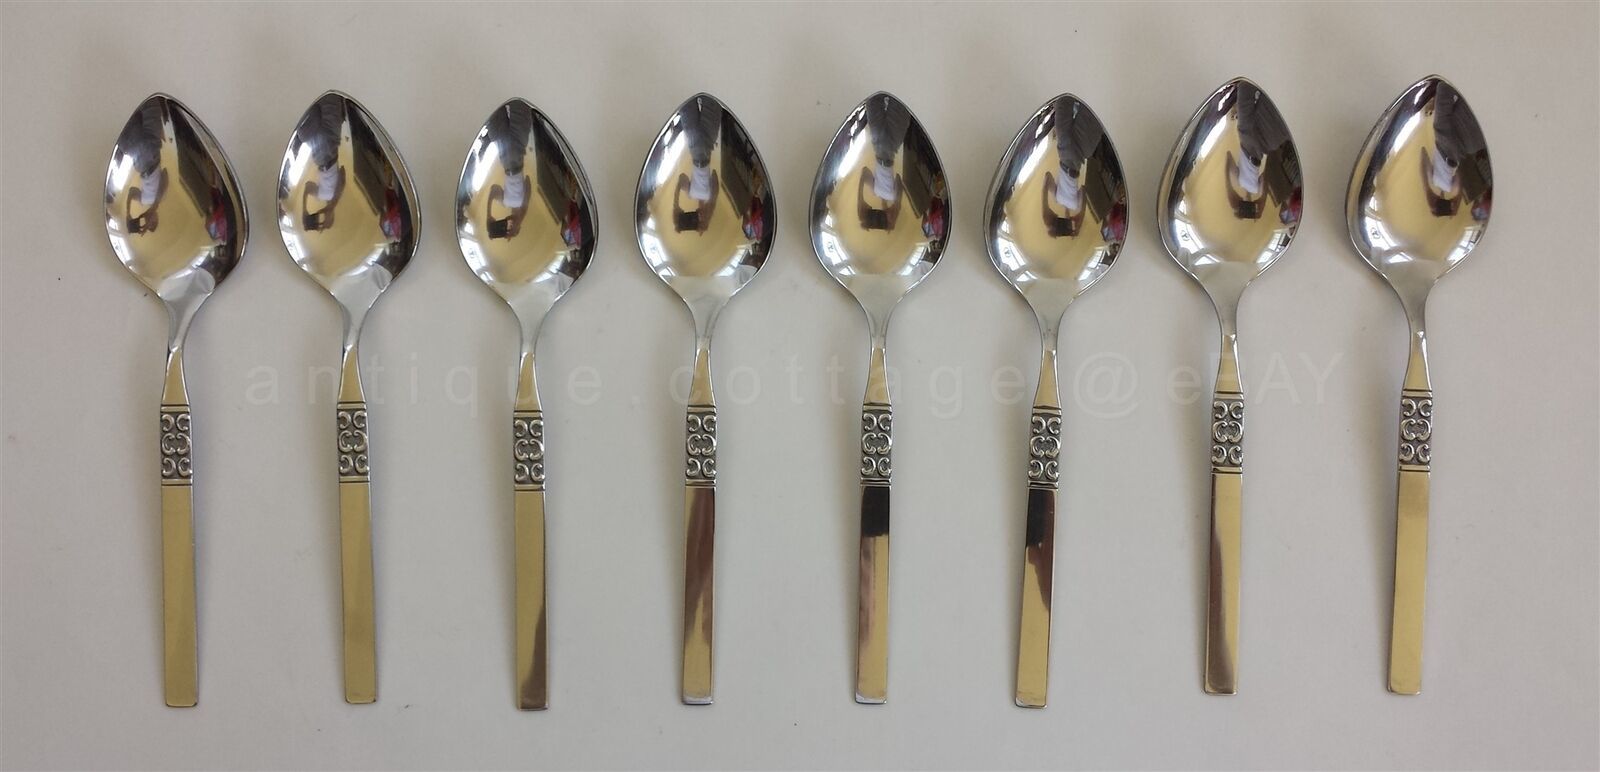 Primary image for ROGERS DELUXE STAINLESS oneida SAN DIEGO FLATWARE unused 8 SOUP SPOONS